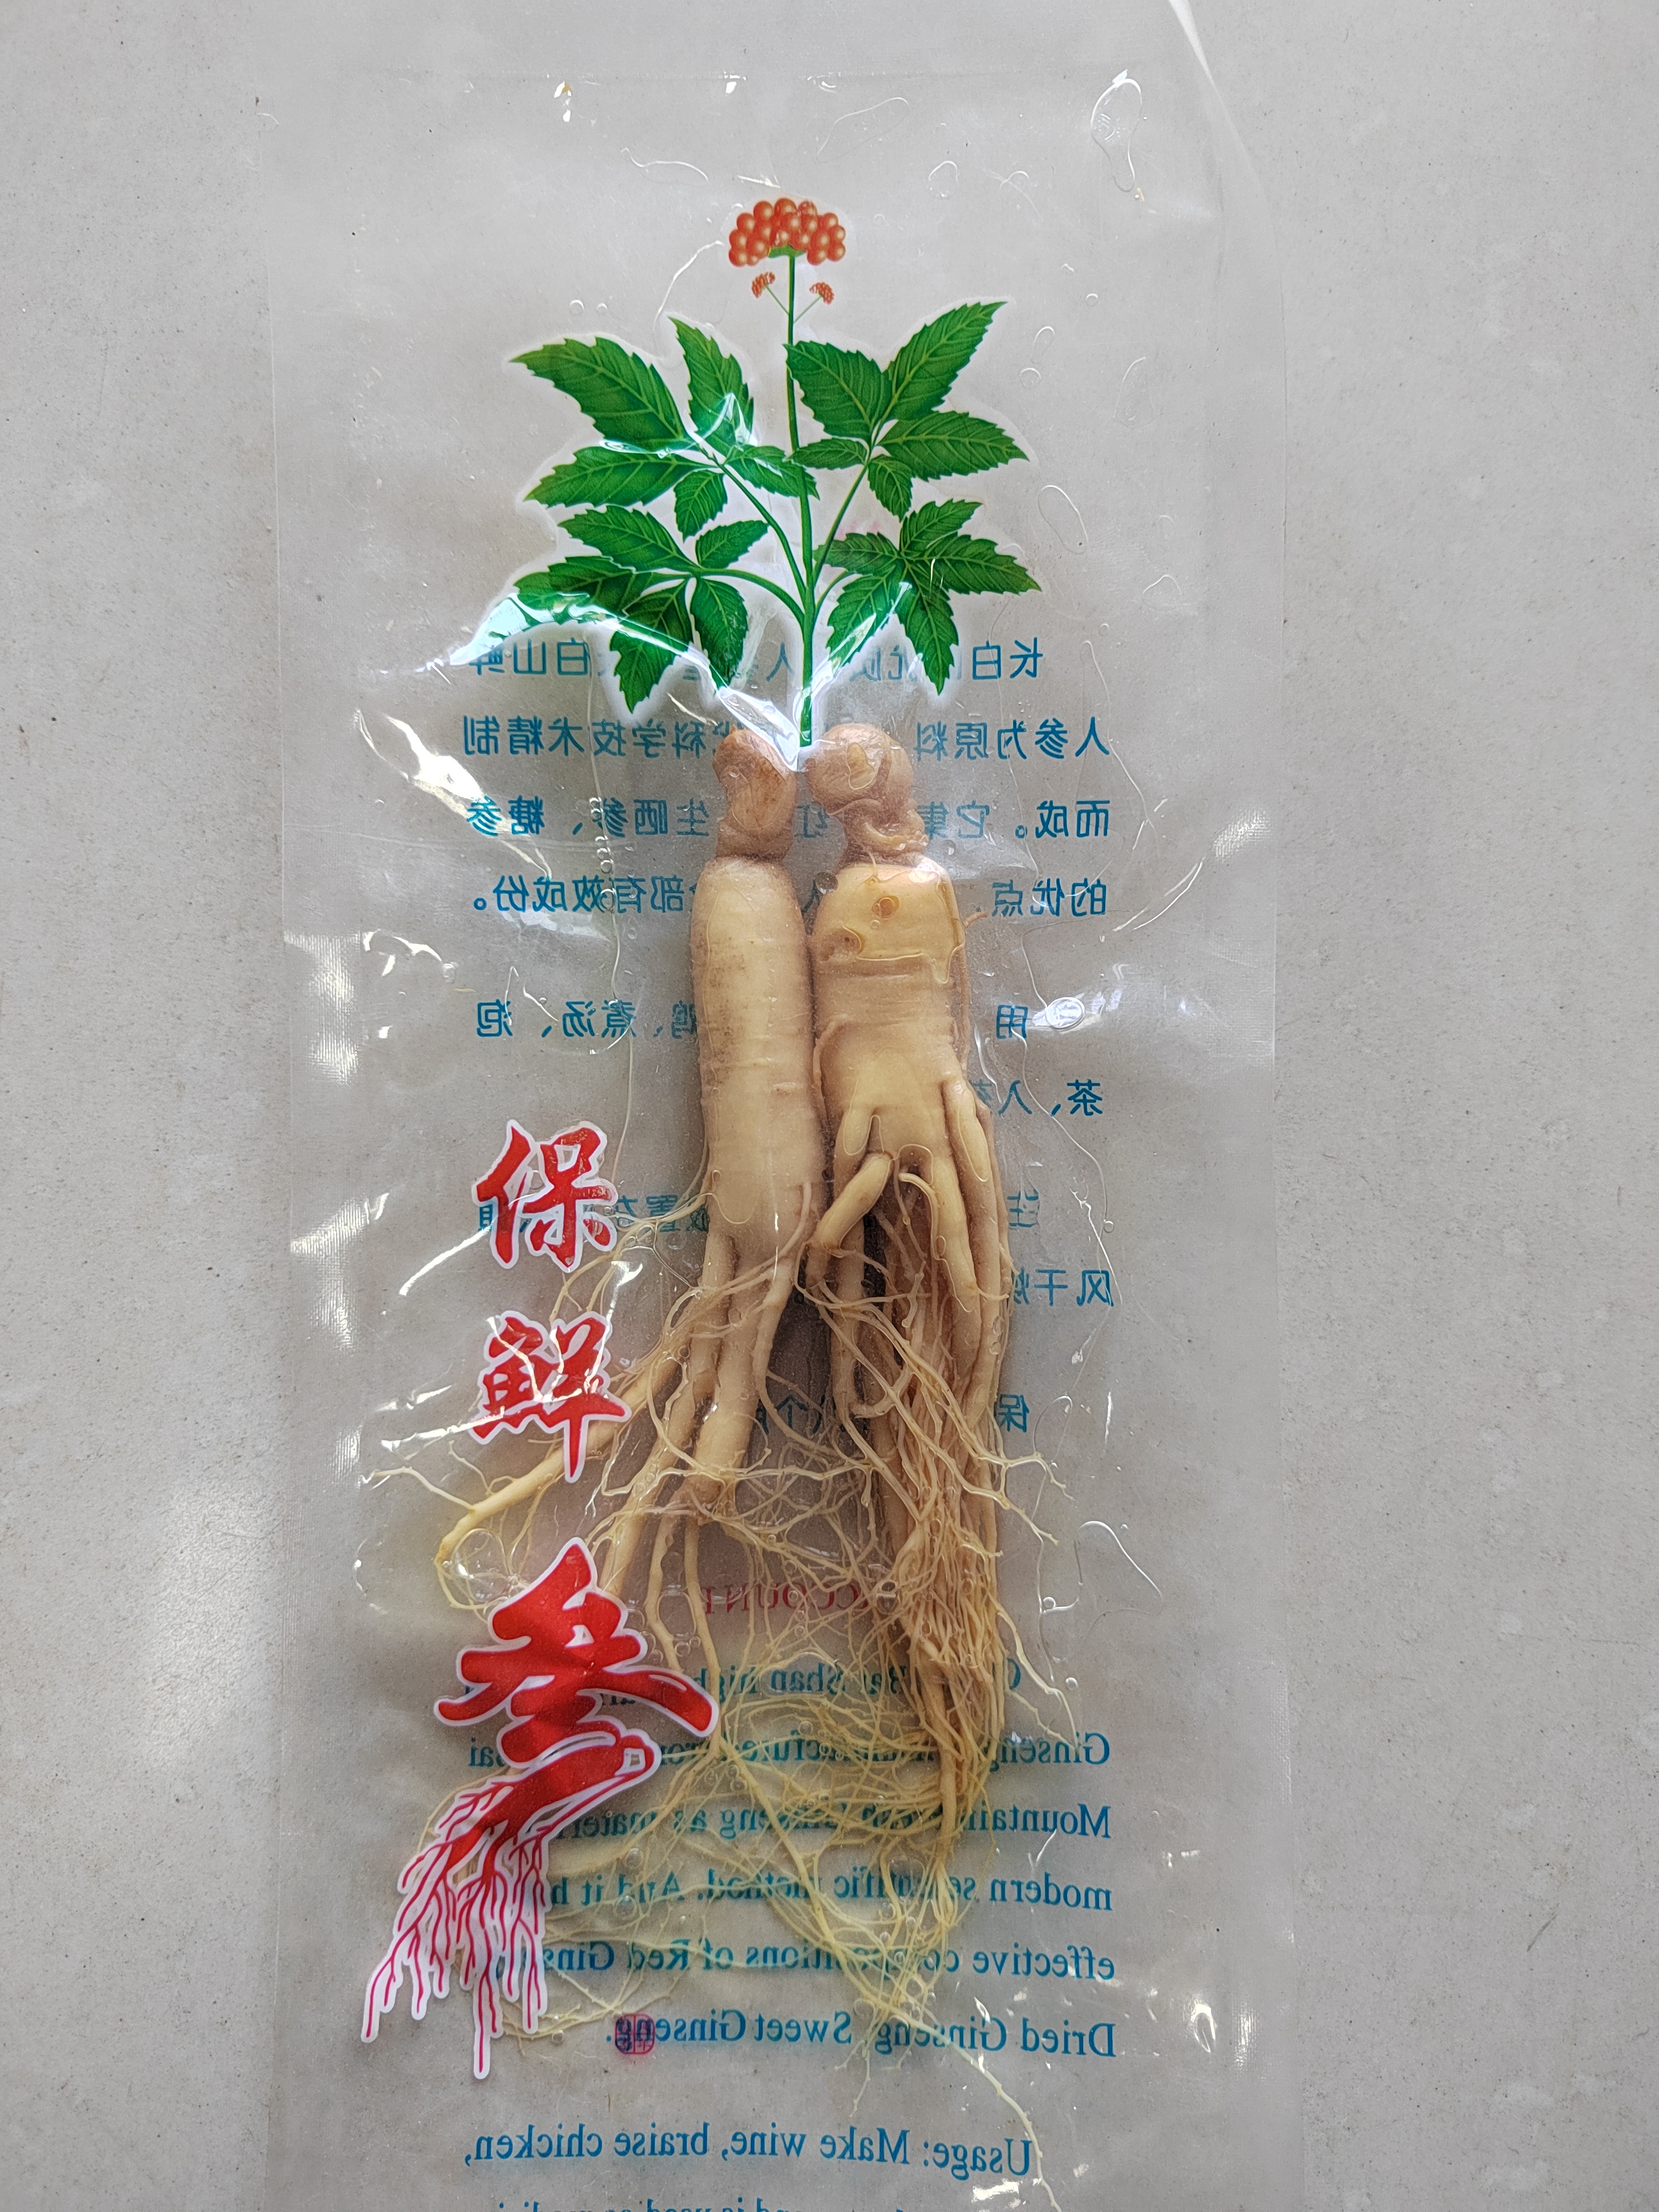 How to Choose and Prepare Ginseng Root for Maximum Benefits?